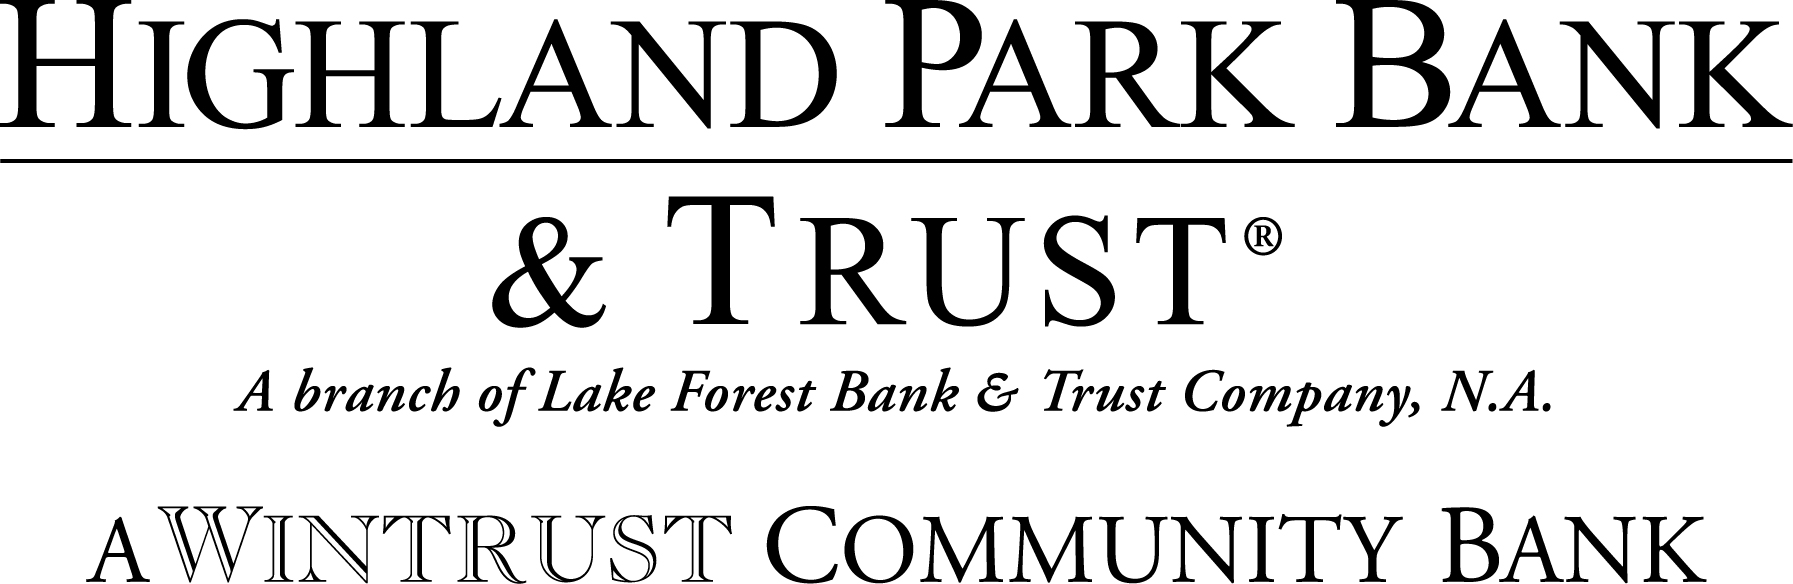 Highland Park Bank and Trust USE